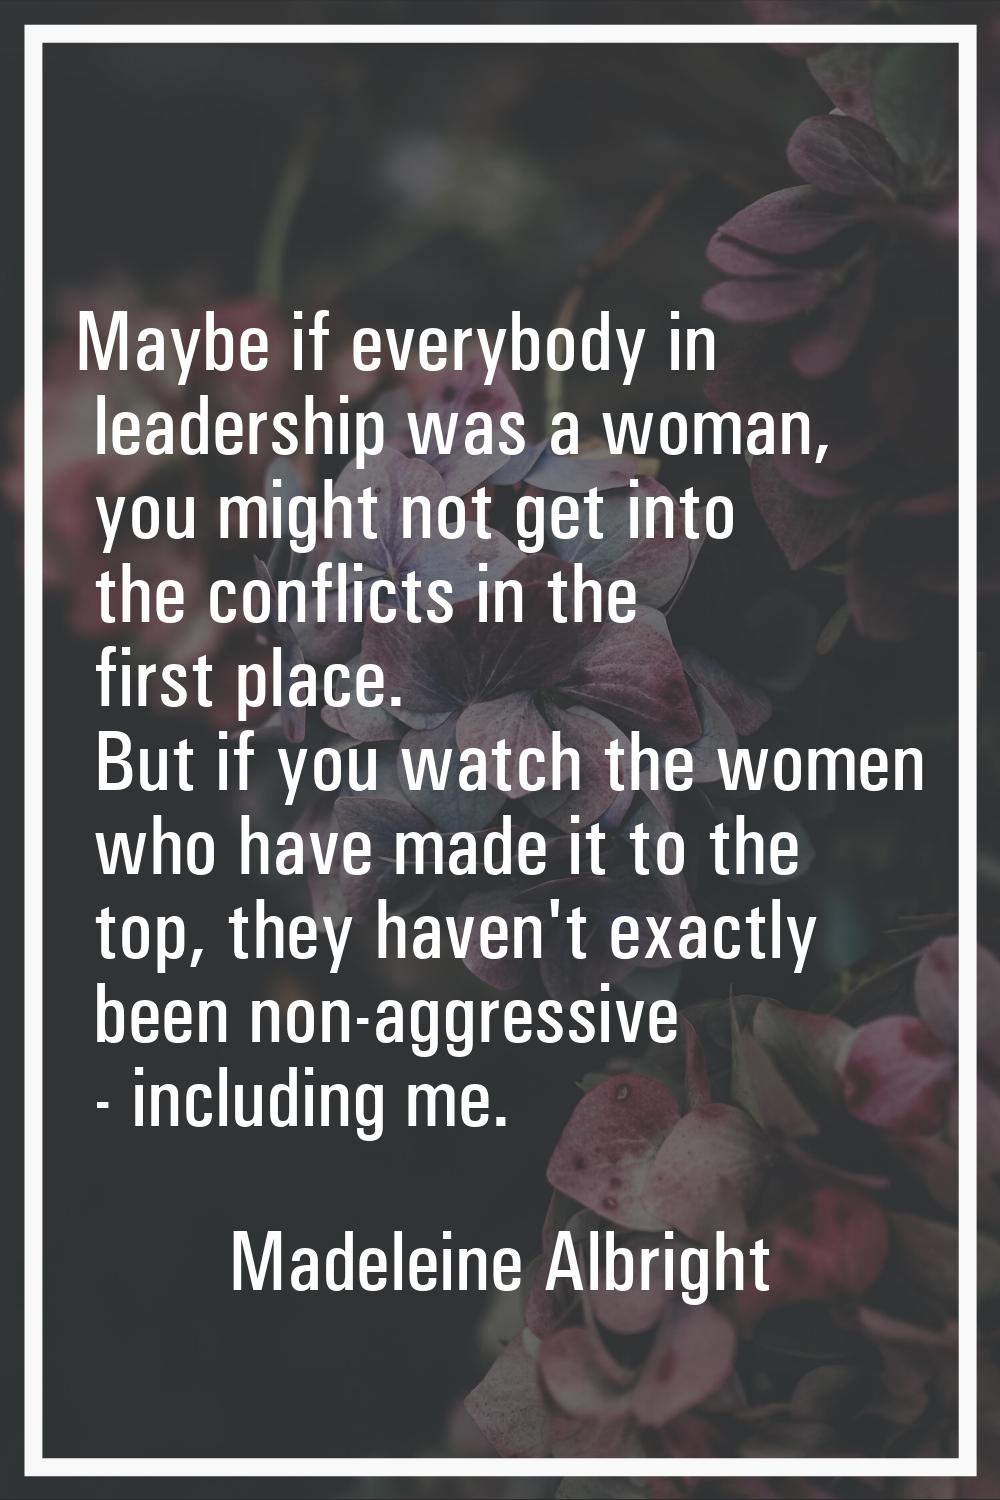 Maybe if everybody in leadership was a woman, you might not get into the conflicts in the first pla